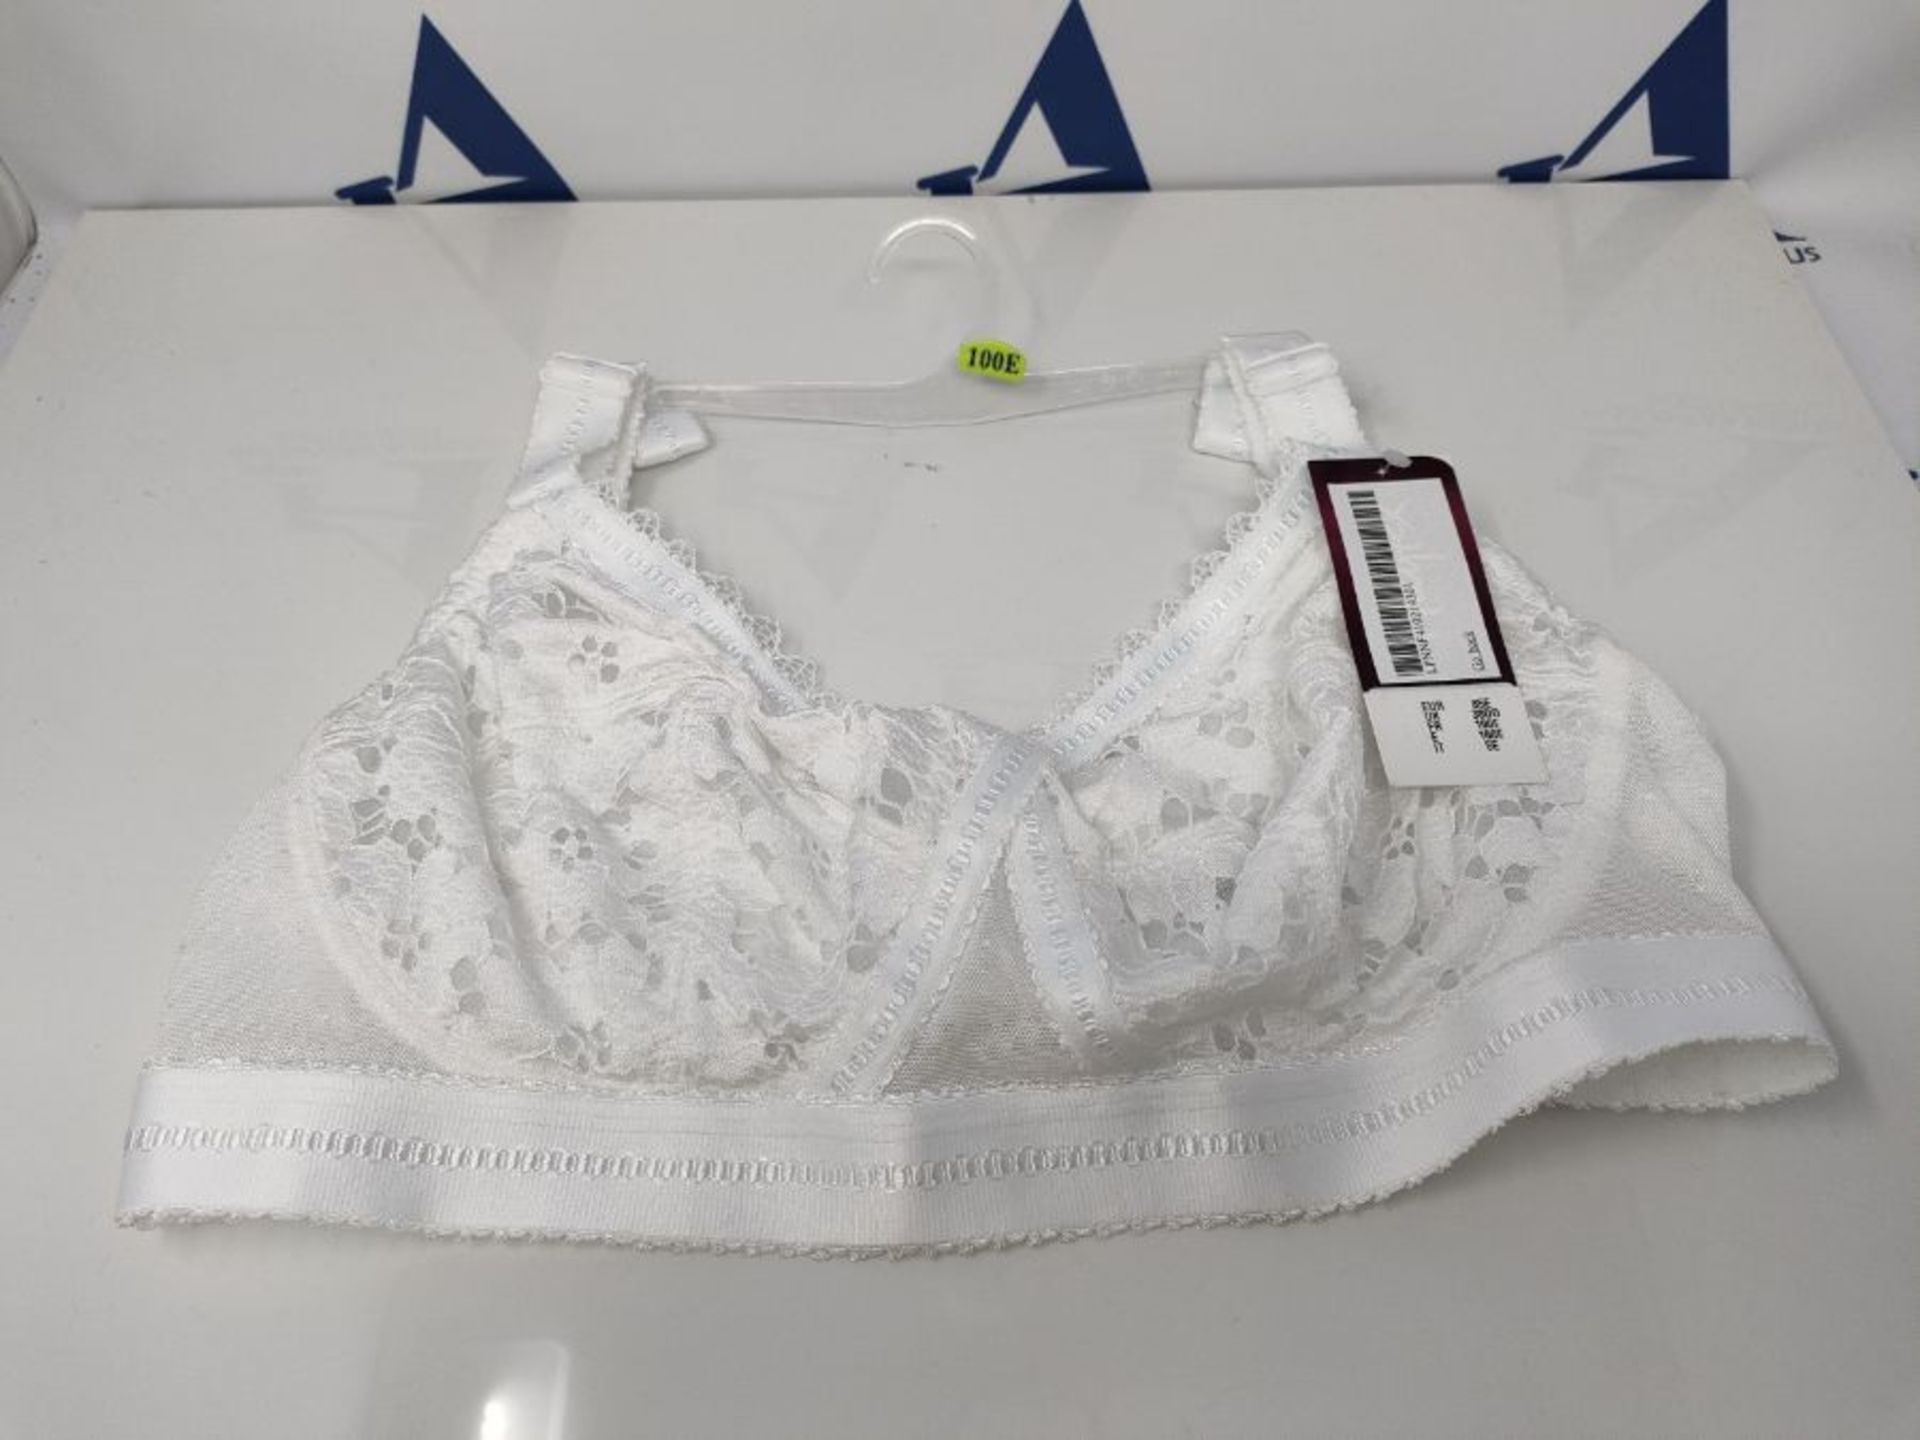 Playtex Women's Cross Your Heart Non Wired Bra - Image 2 of 3